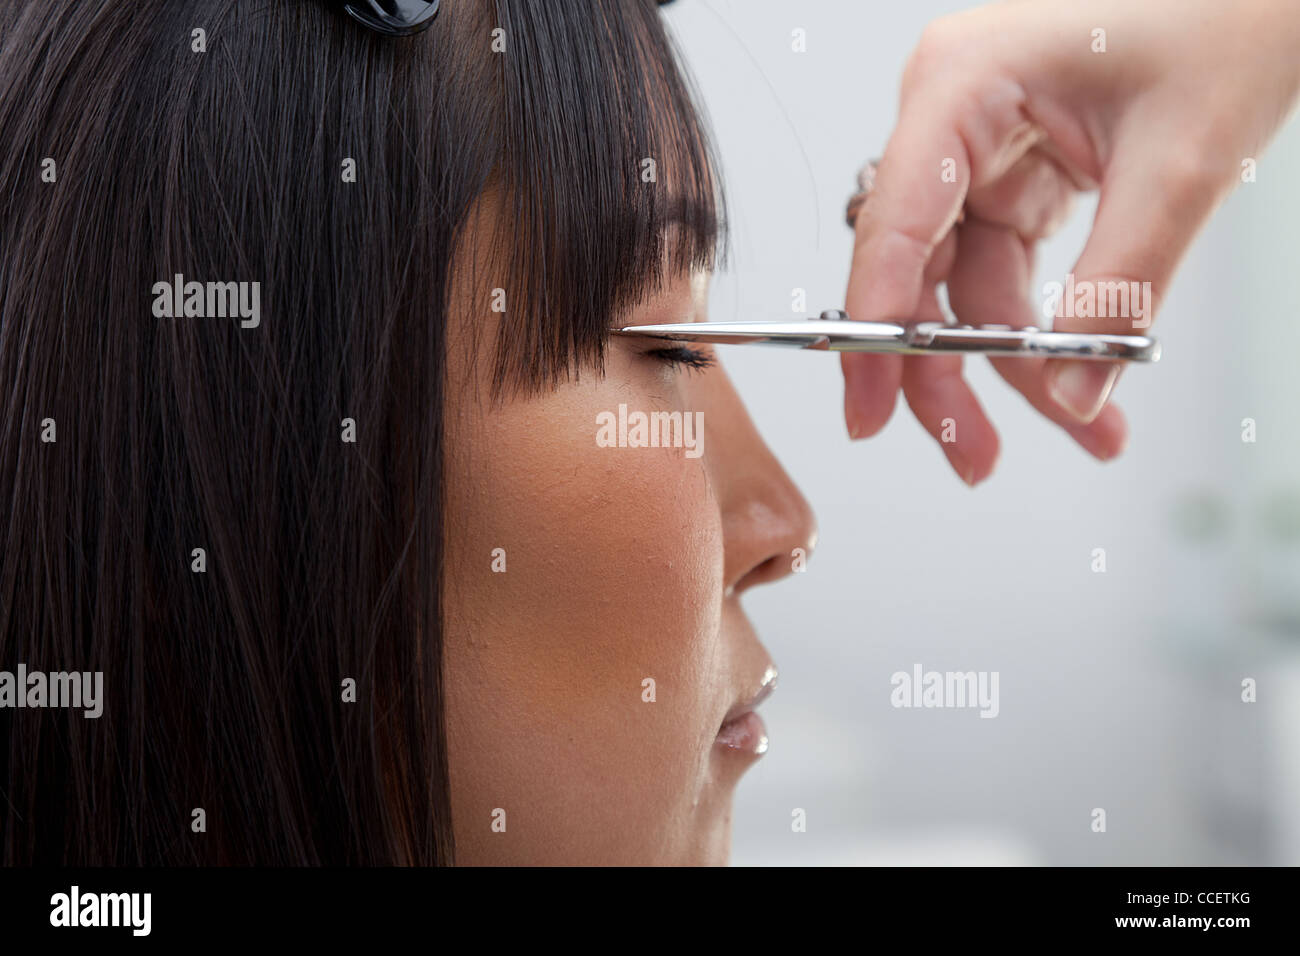 Close-up view of hairstylist cutting hair Stock Photo